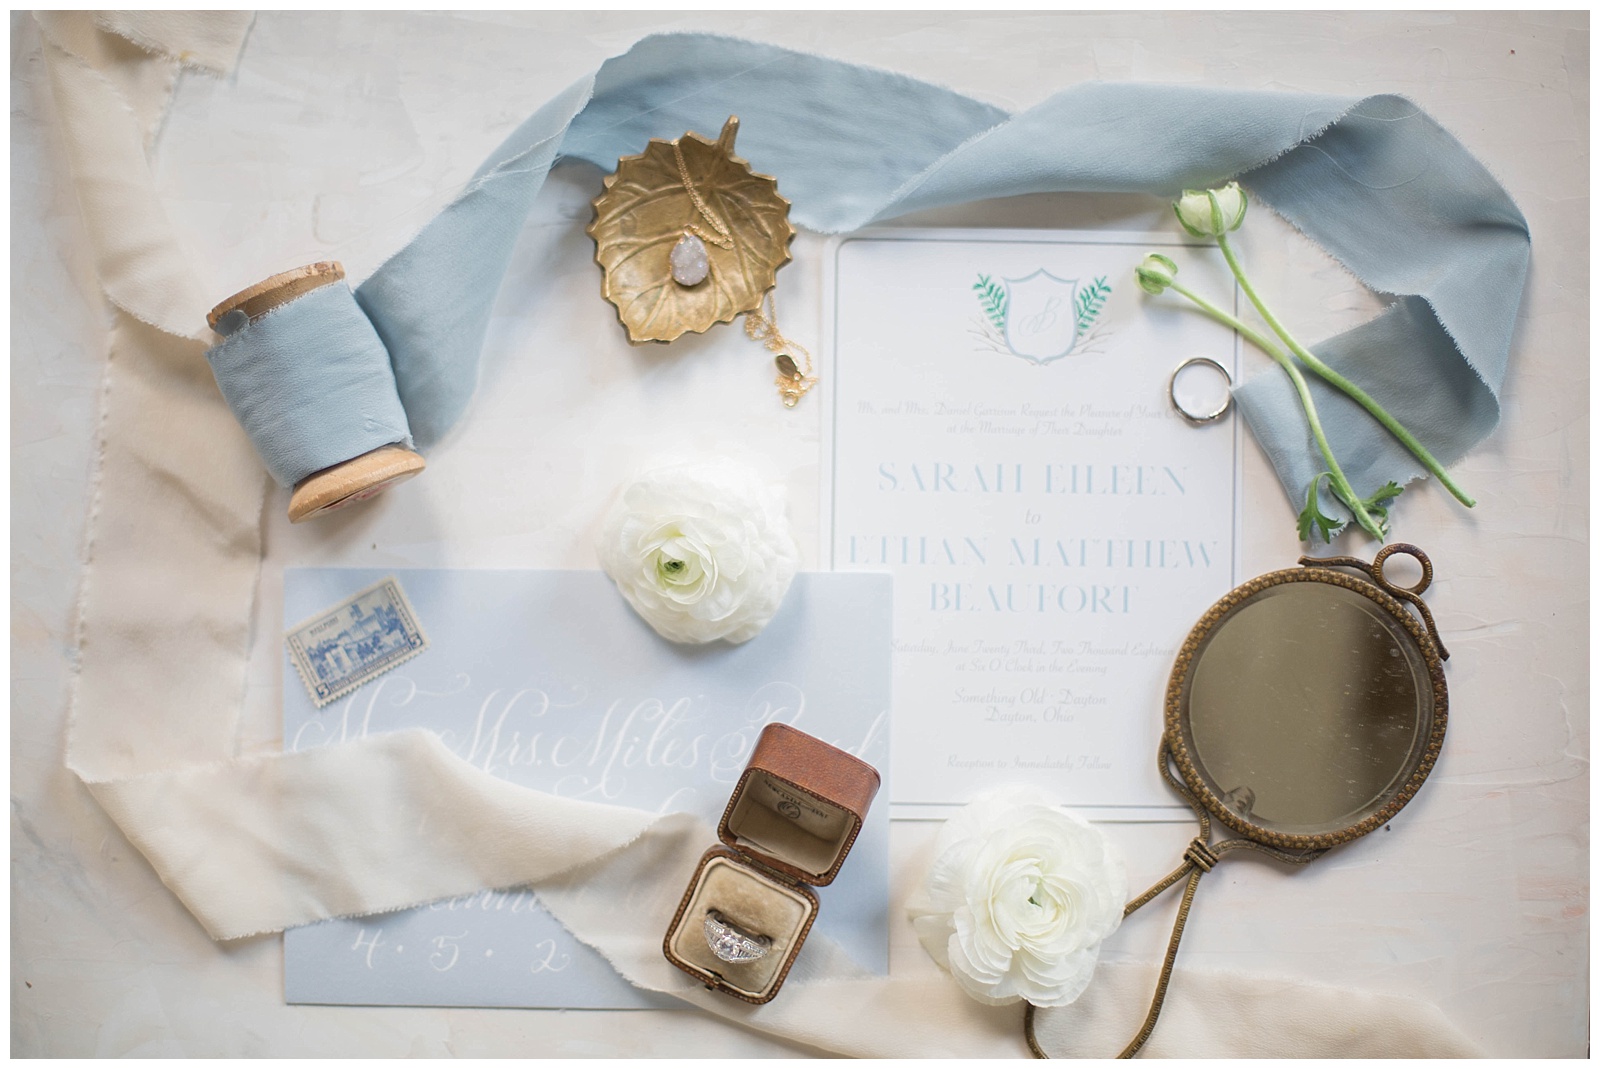 Fine Art Styled Shoot | Monica Brown Photography | monicabrownphoto.com